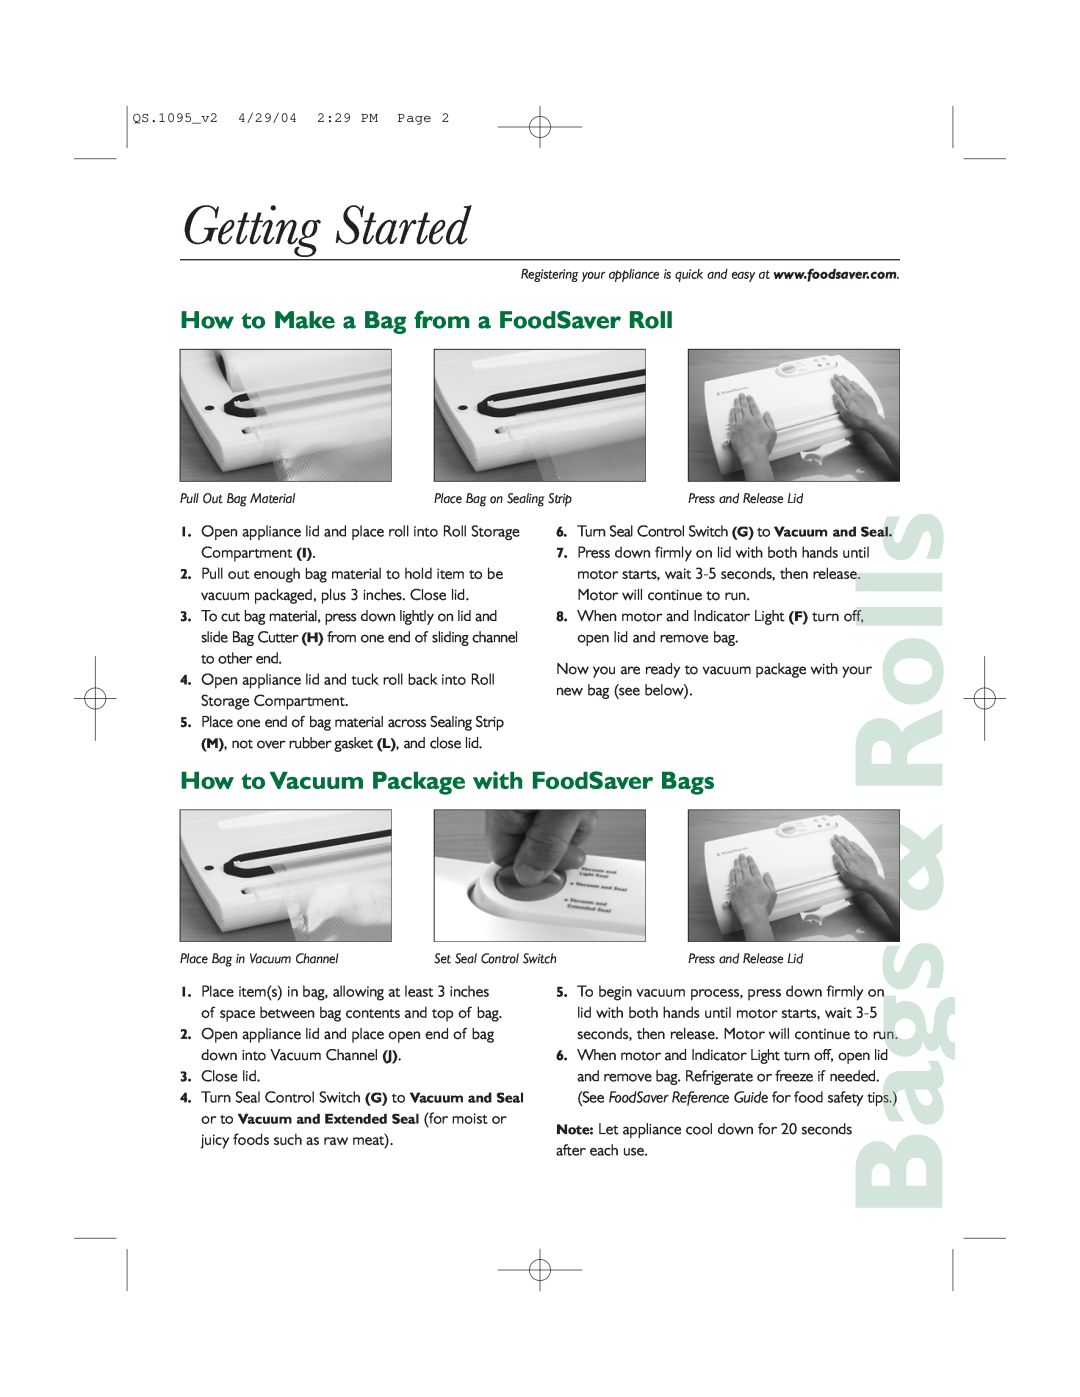 FoodSaver V1095 quick start Getting Started, How to Make a Bag from a FoodSaver Roll, Rolls 